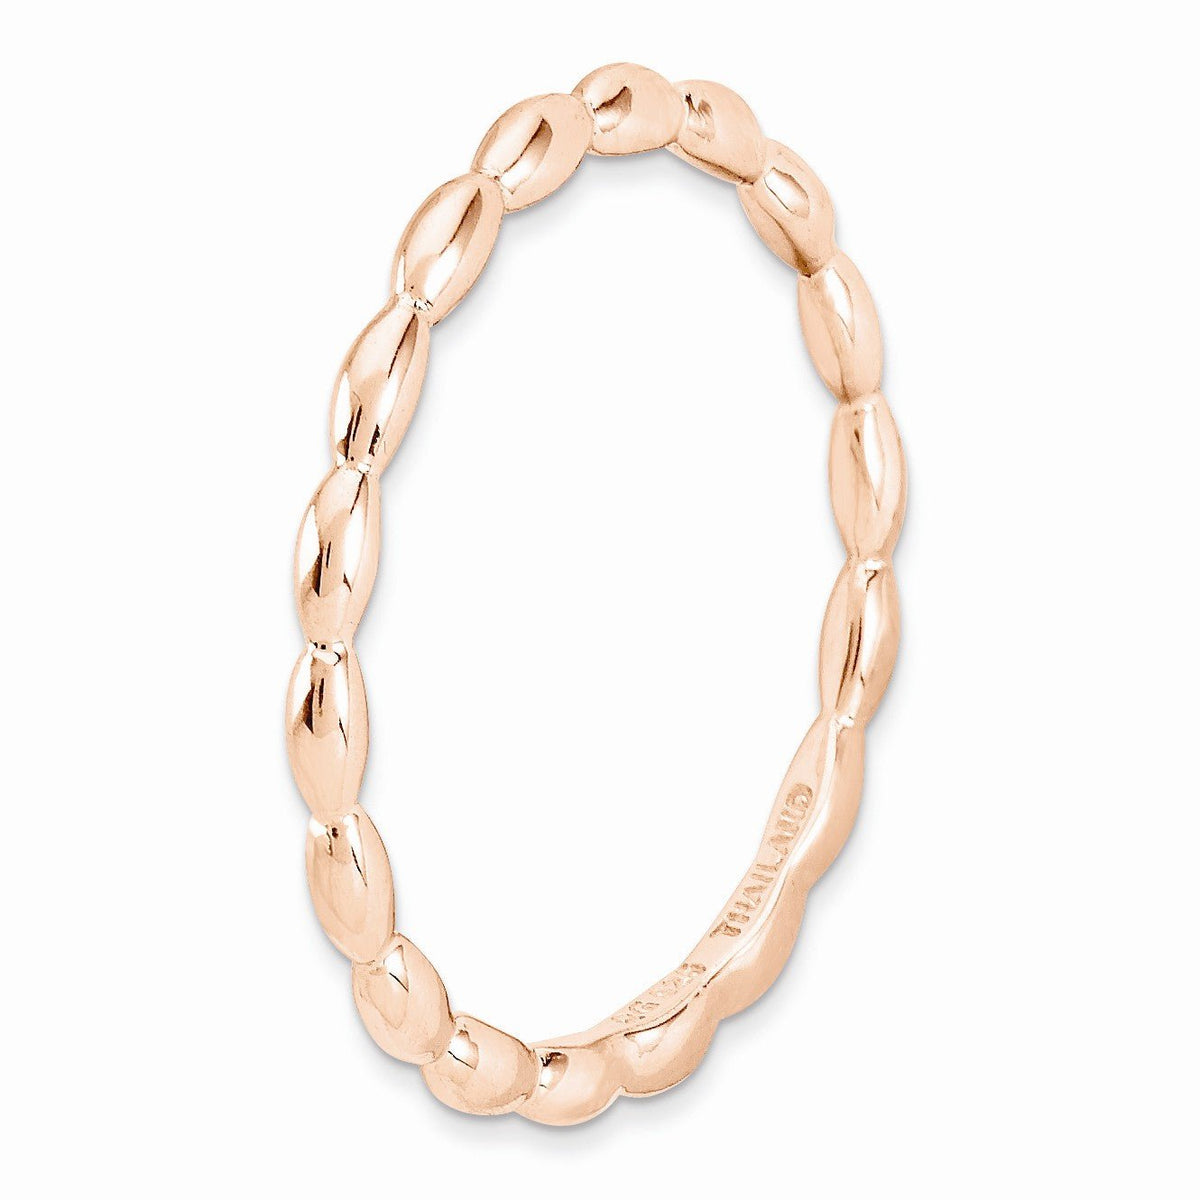 Alternate view of the 1.5mm 14k Rose Gold Plated Sterling Silver Stackable Rice Bead Band by The Black Bow Jewelry Co.